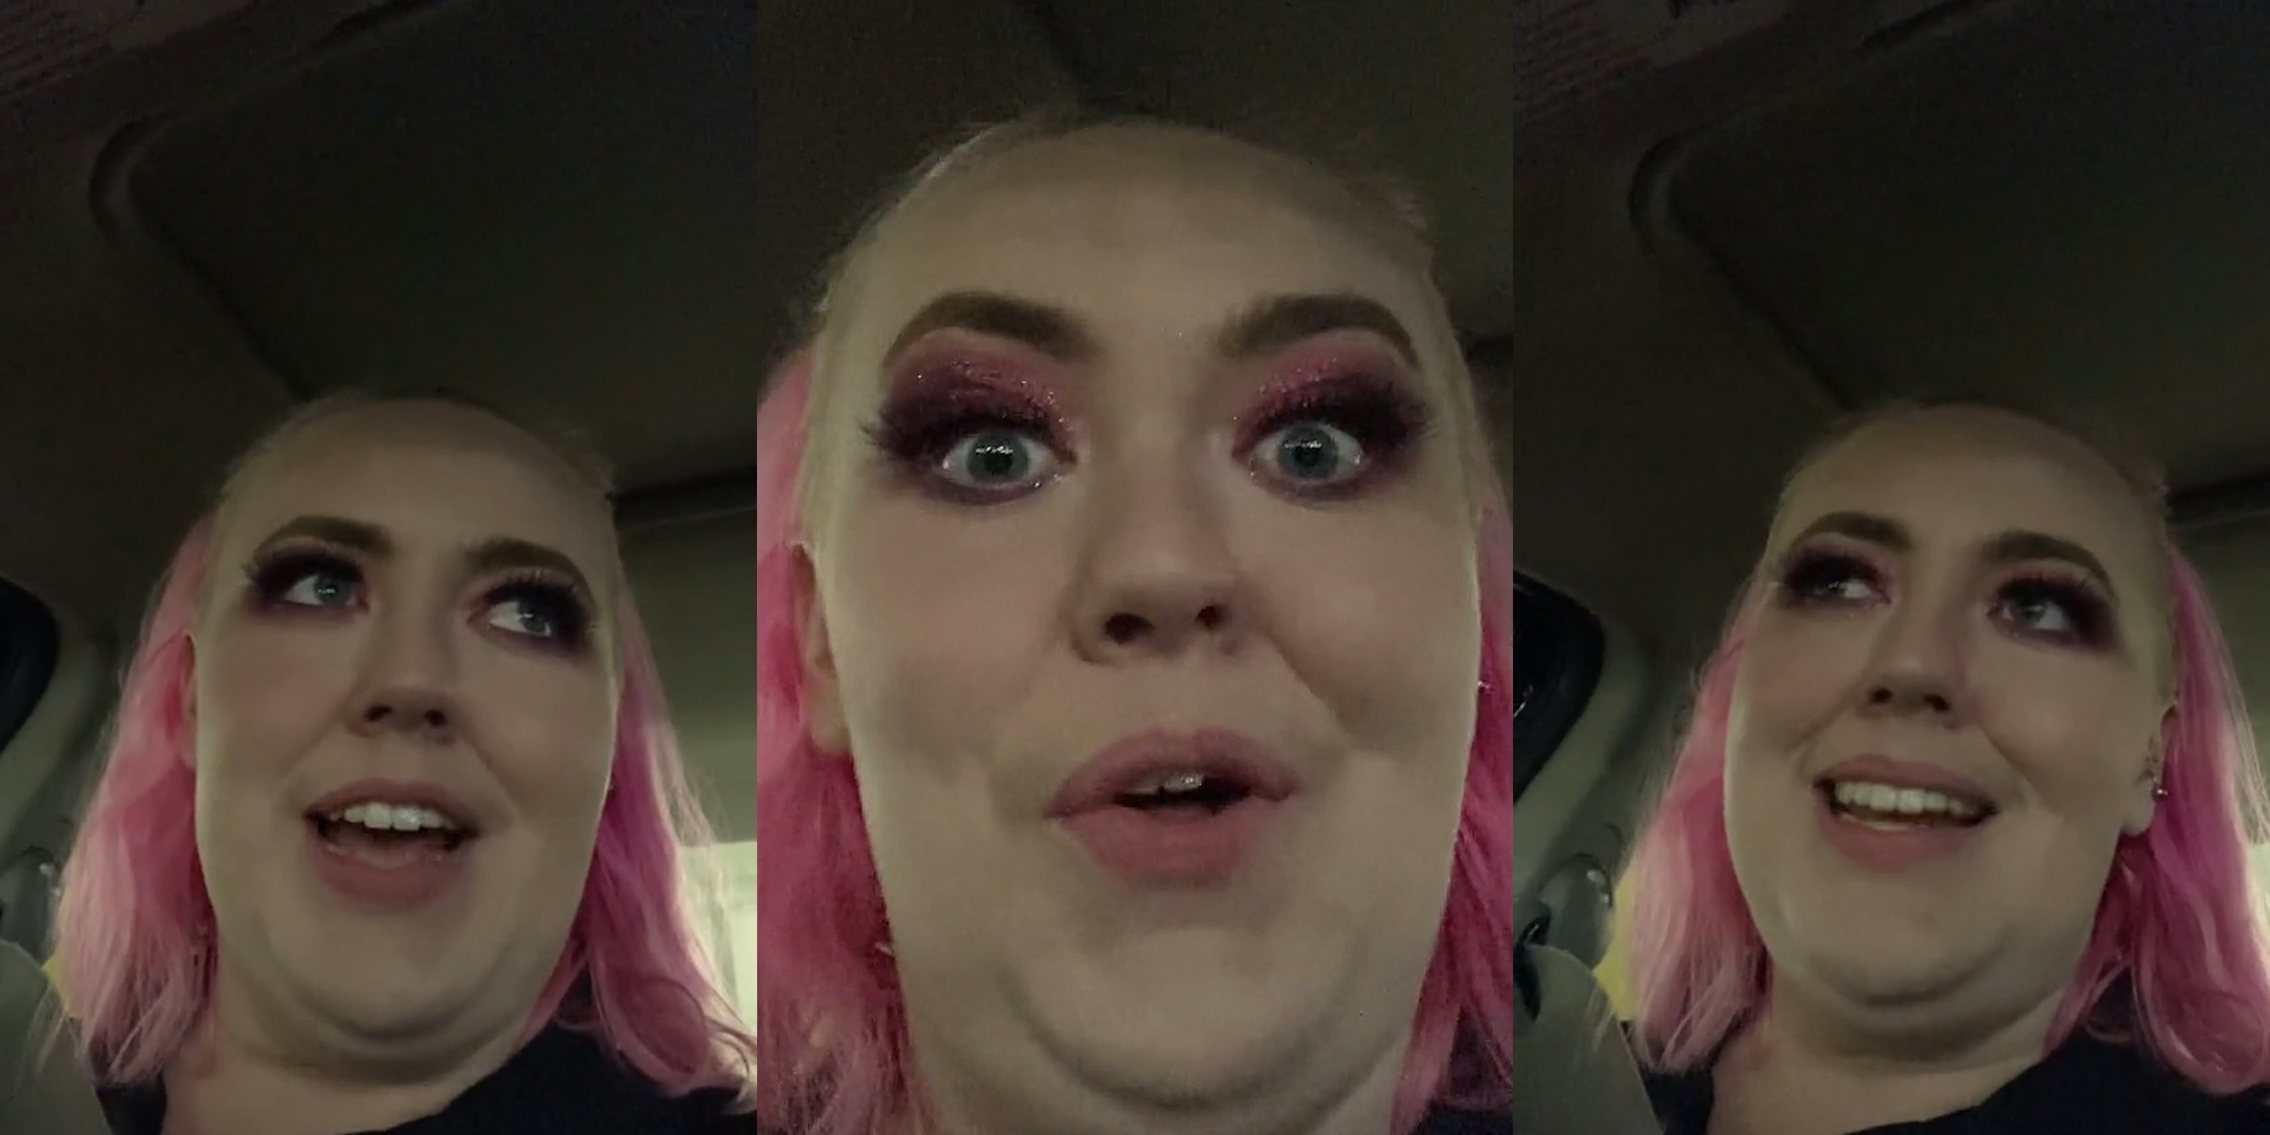 woman speaking in car looking right (l) woman speaking in car (c) woman speaking in car looking left (r)